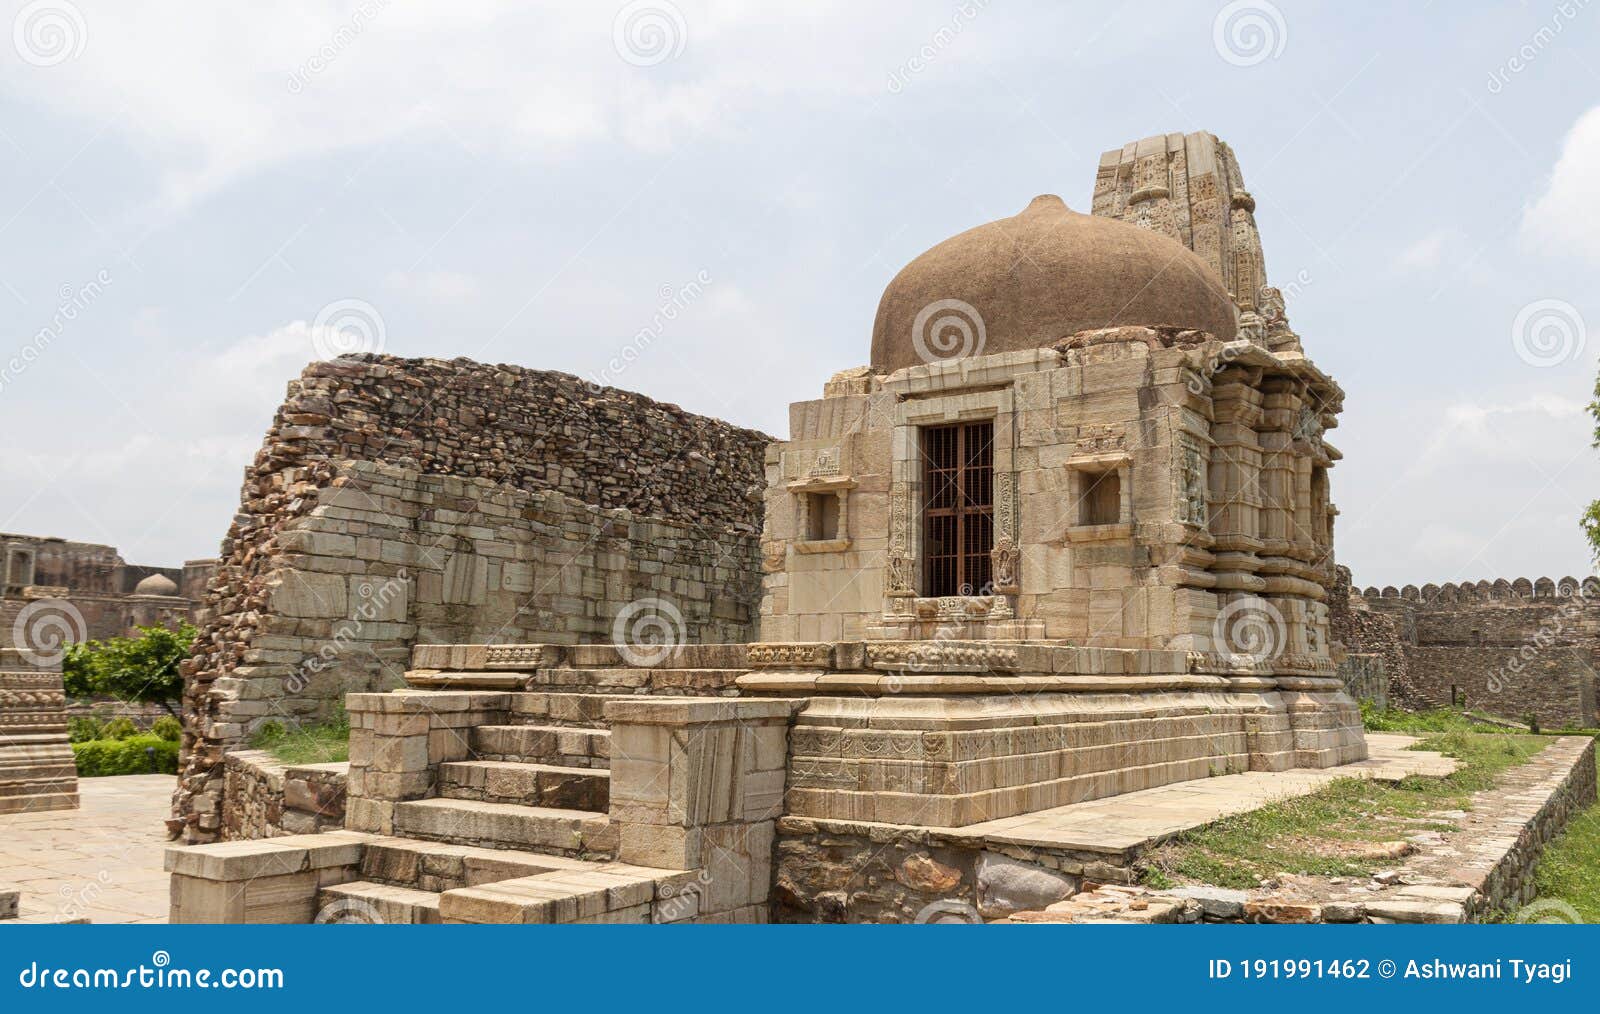 old shiv temple in chittorgarh fort, rajasthan